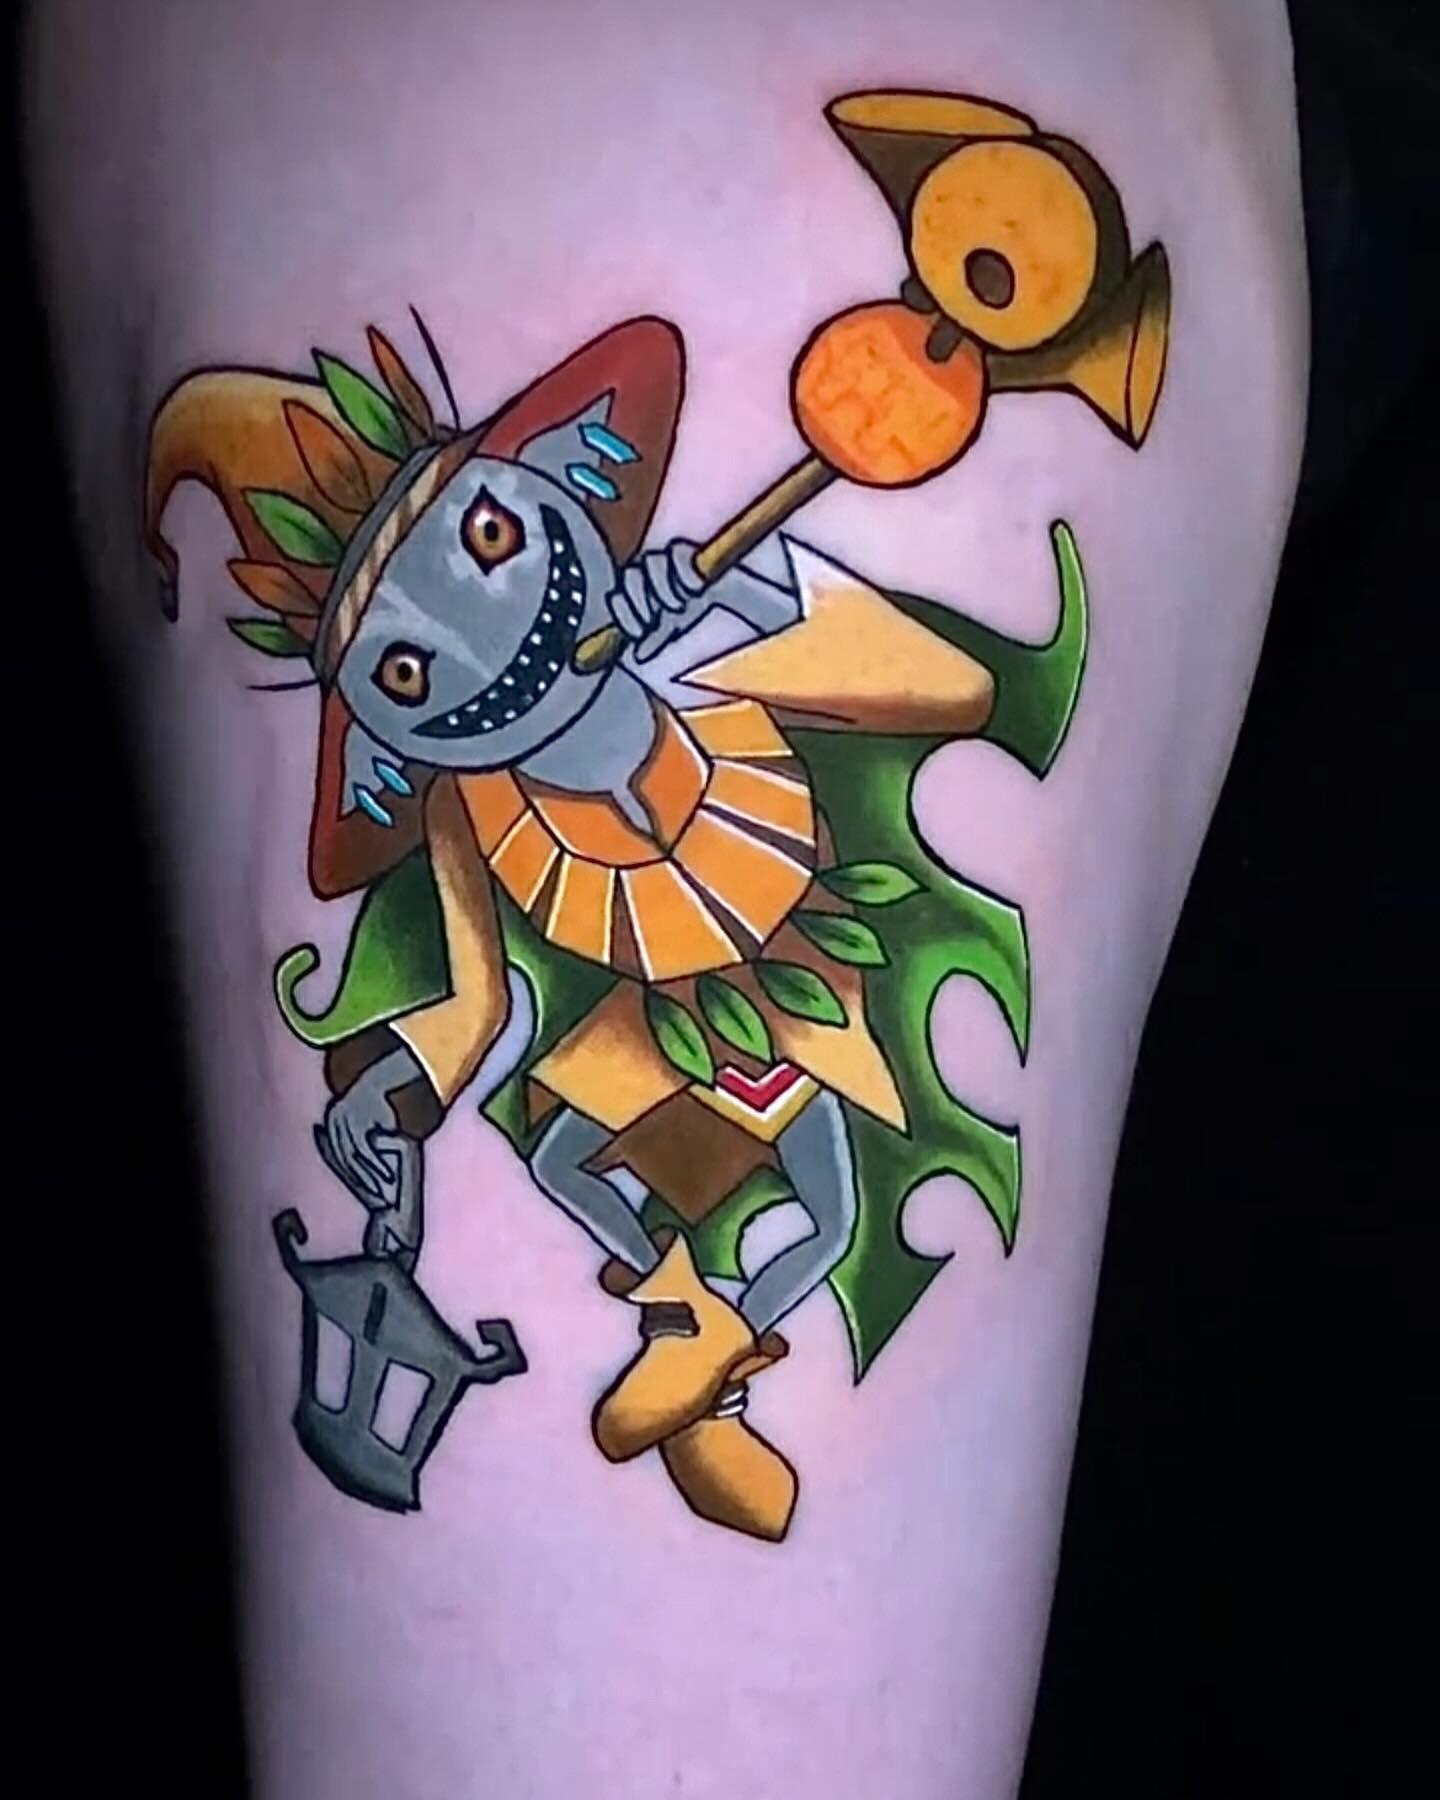 @lamimitattoo_ with this really sweet character from Zelda 😮&zwj;💨🔥
.
Call the shop today to book with @lamimitattoo_ 
.
720.904.8904